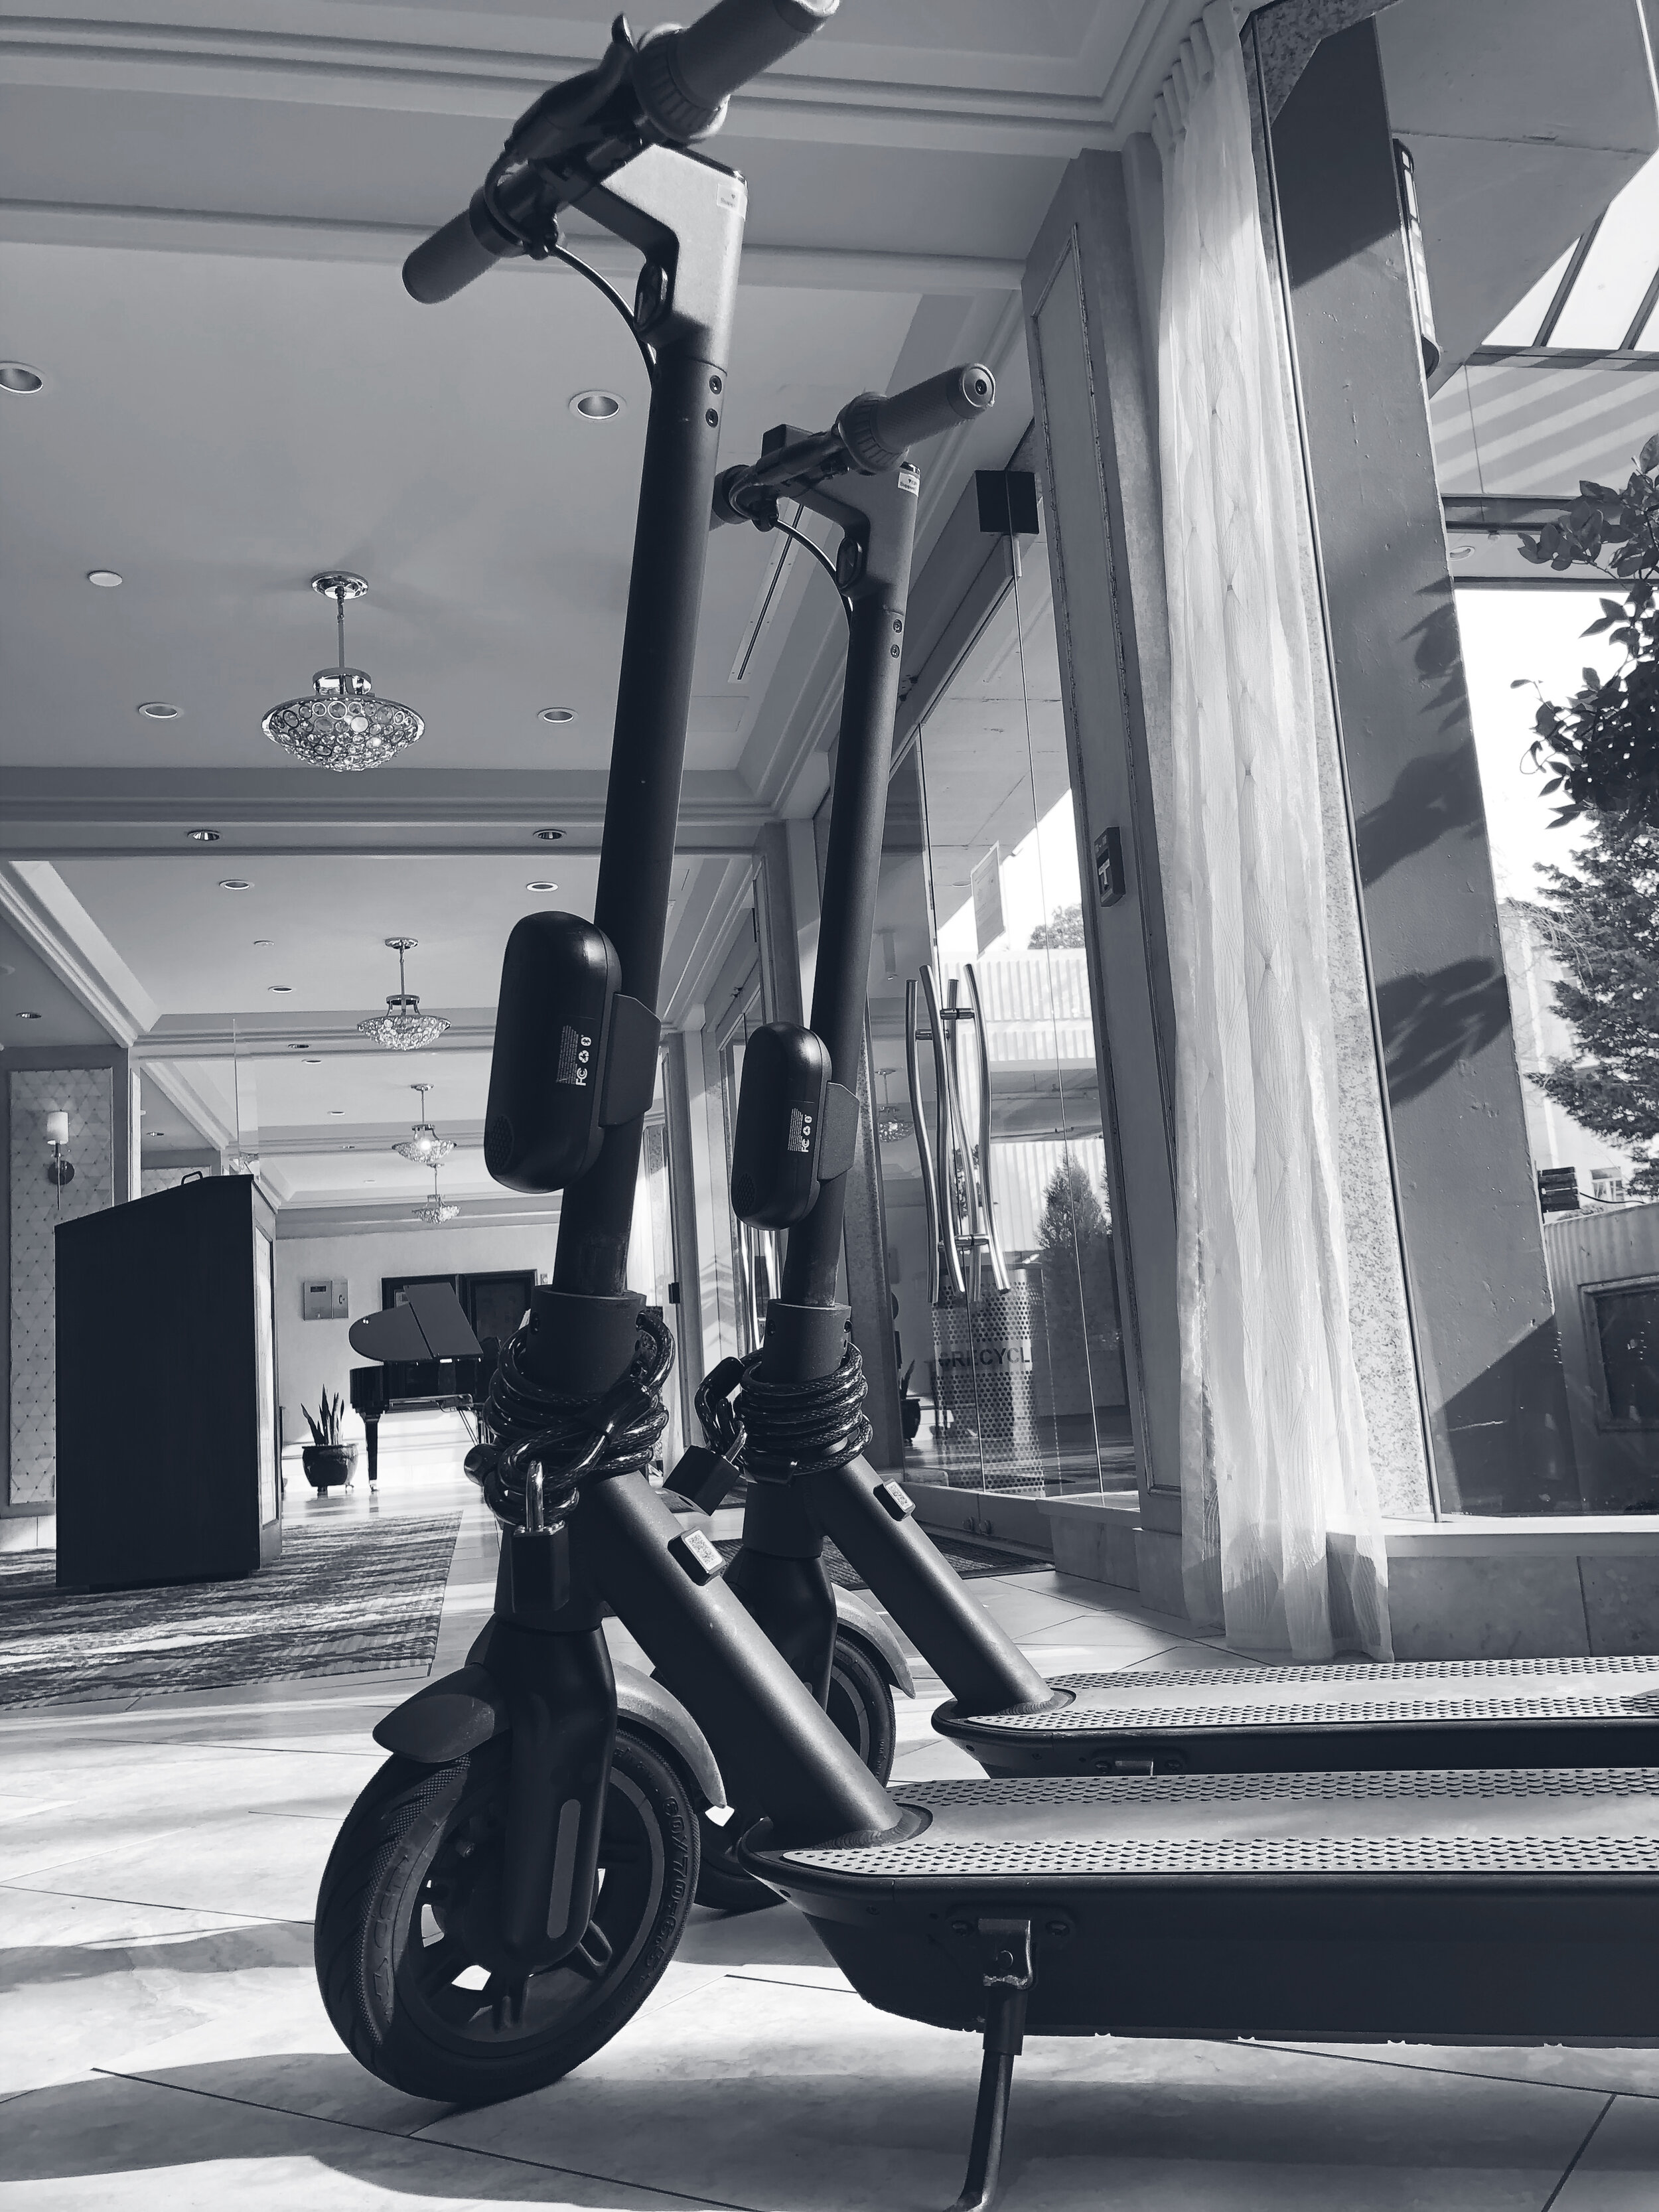 We Are Different Than The Others  - Unlike traditional dockless fleets, our e-scooters are integrated into hotels and businesses to ensure they are available in a responsible, and community-first way. This means that local businesses benefit directly from our partnership, cars are taken off the street, and there is no scooter clutter blocking sidewalks. Our integrated setup also ensures we are able to take safety seriously and provide sanitized helmets to all our riders. Talk about a win-win.